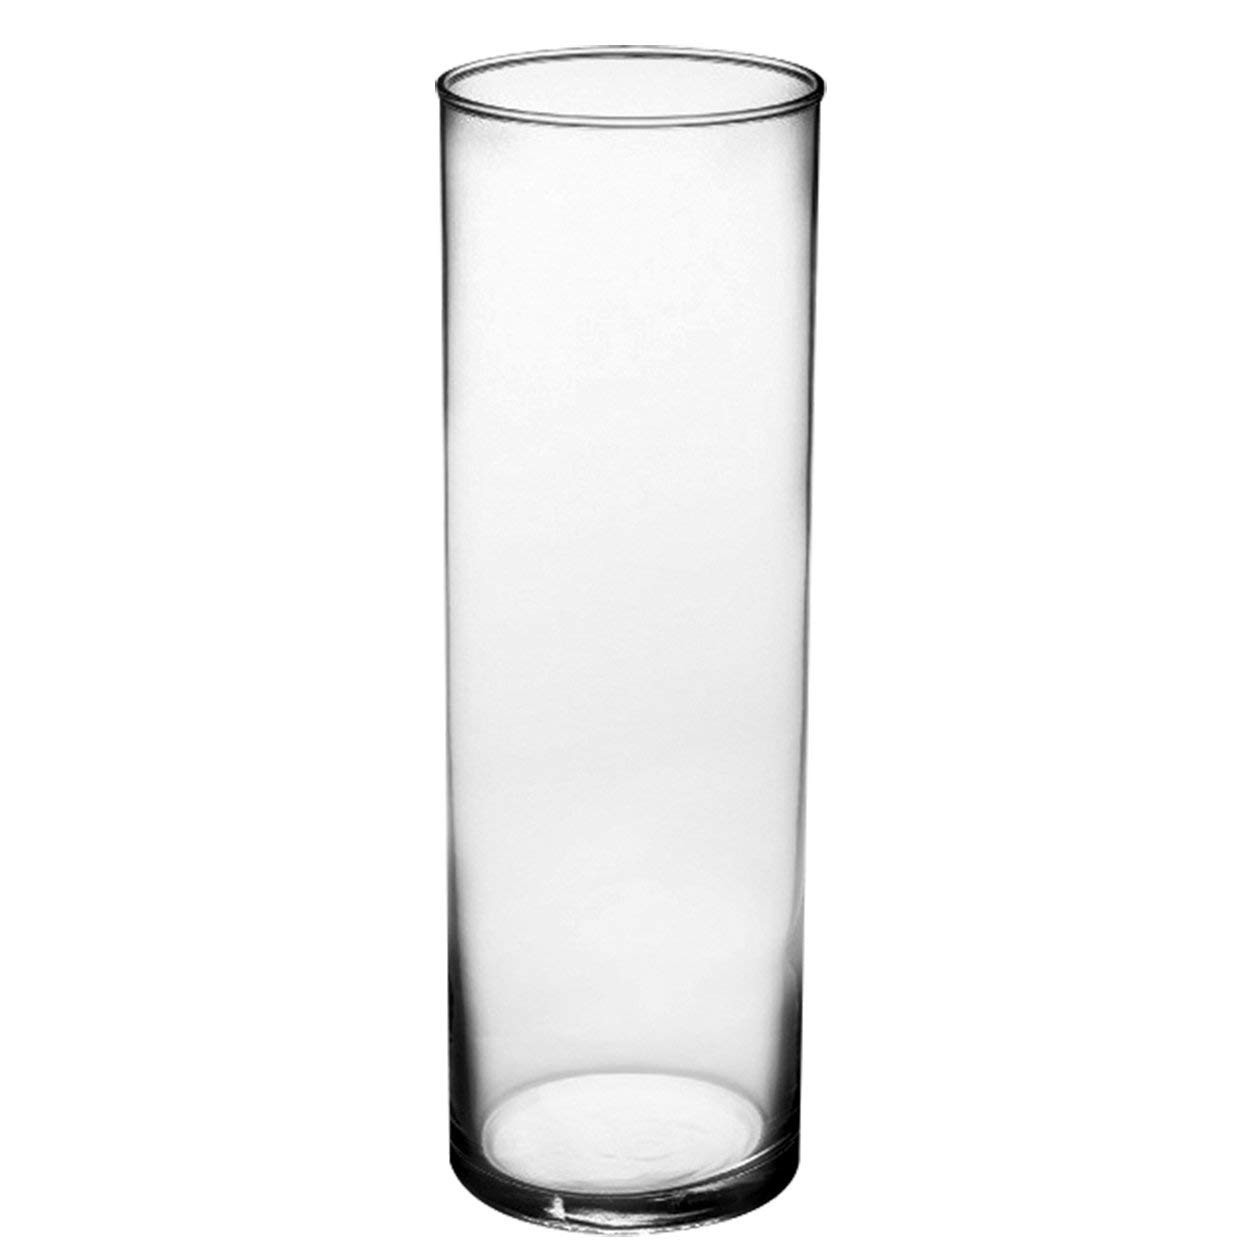 28 Stunning Inexpensive Clear Glass Vases 2024 free download inexpensive clear glass vases of amazon com syndicate sales 3 1 2 x 10 1 2 cylinder vase clear for amazon com syndicate sales 3 1 2 x 10 1 2 cylinder vase clear planters garden outdoor